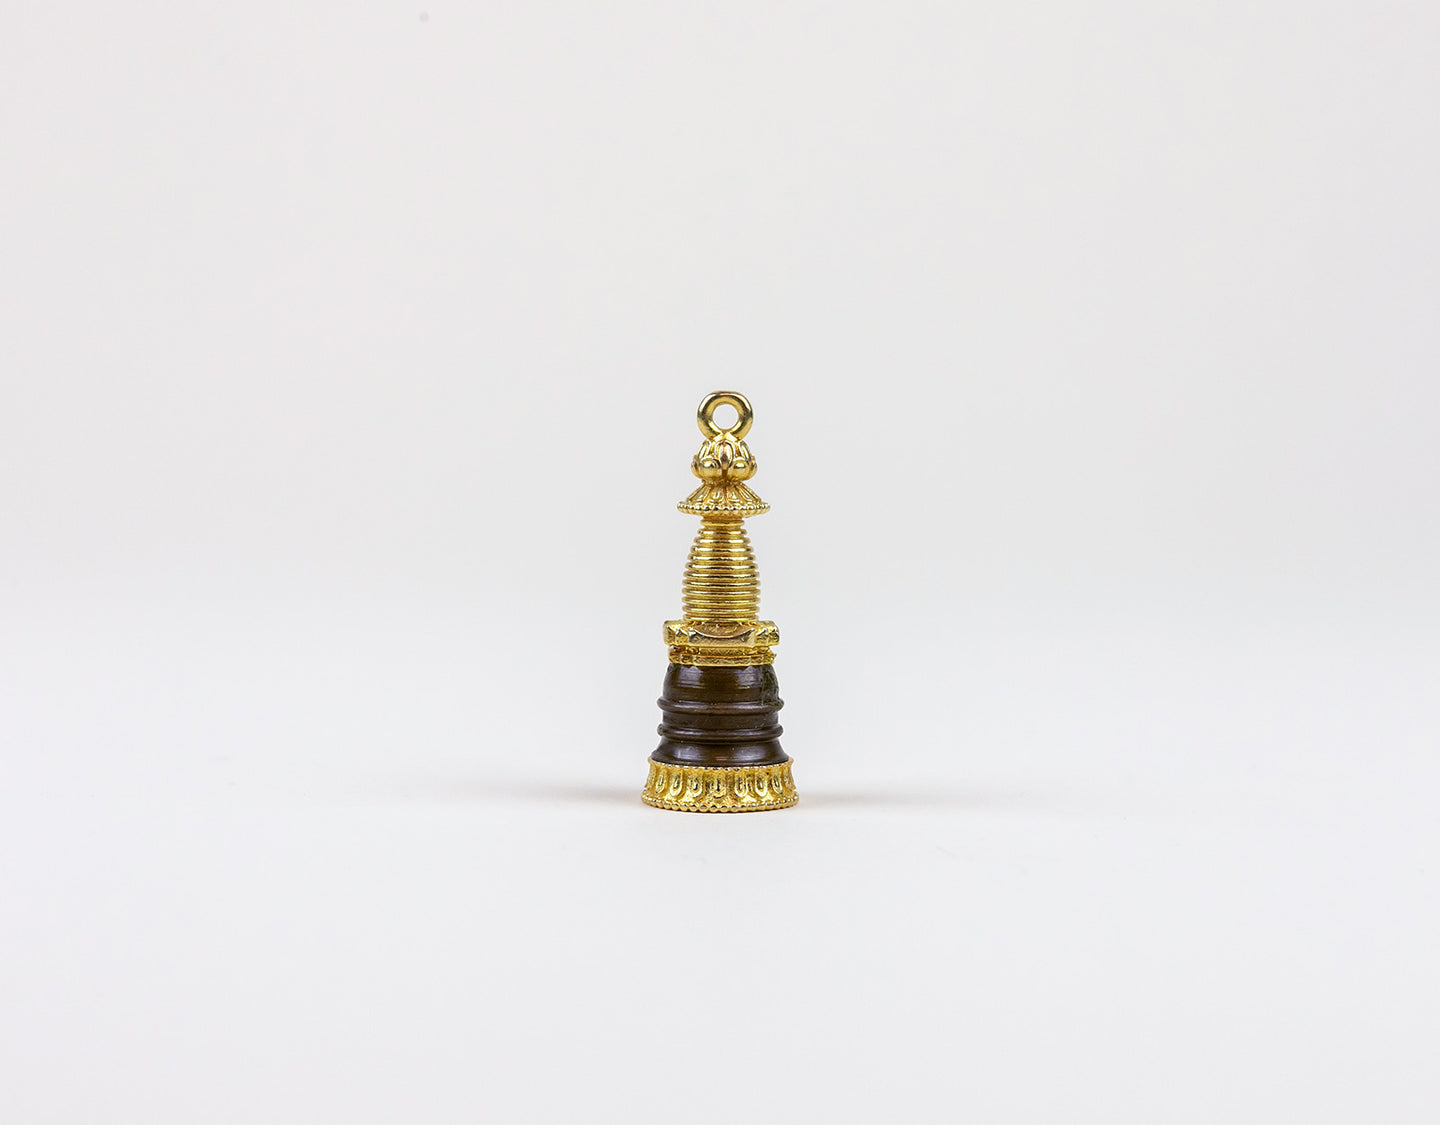 Pendant and relic holder - the Stupa